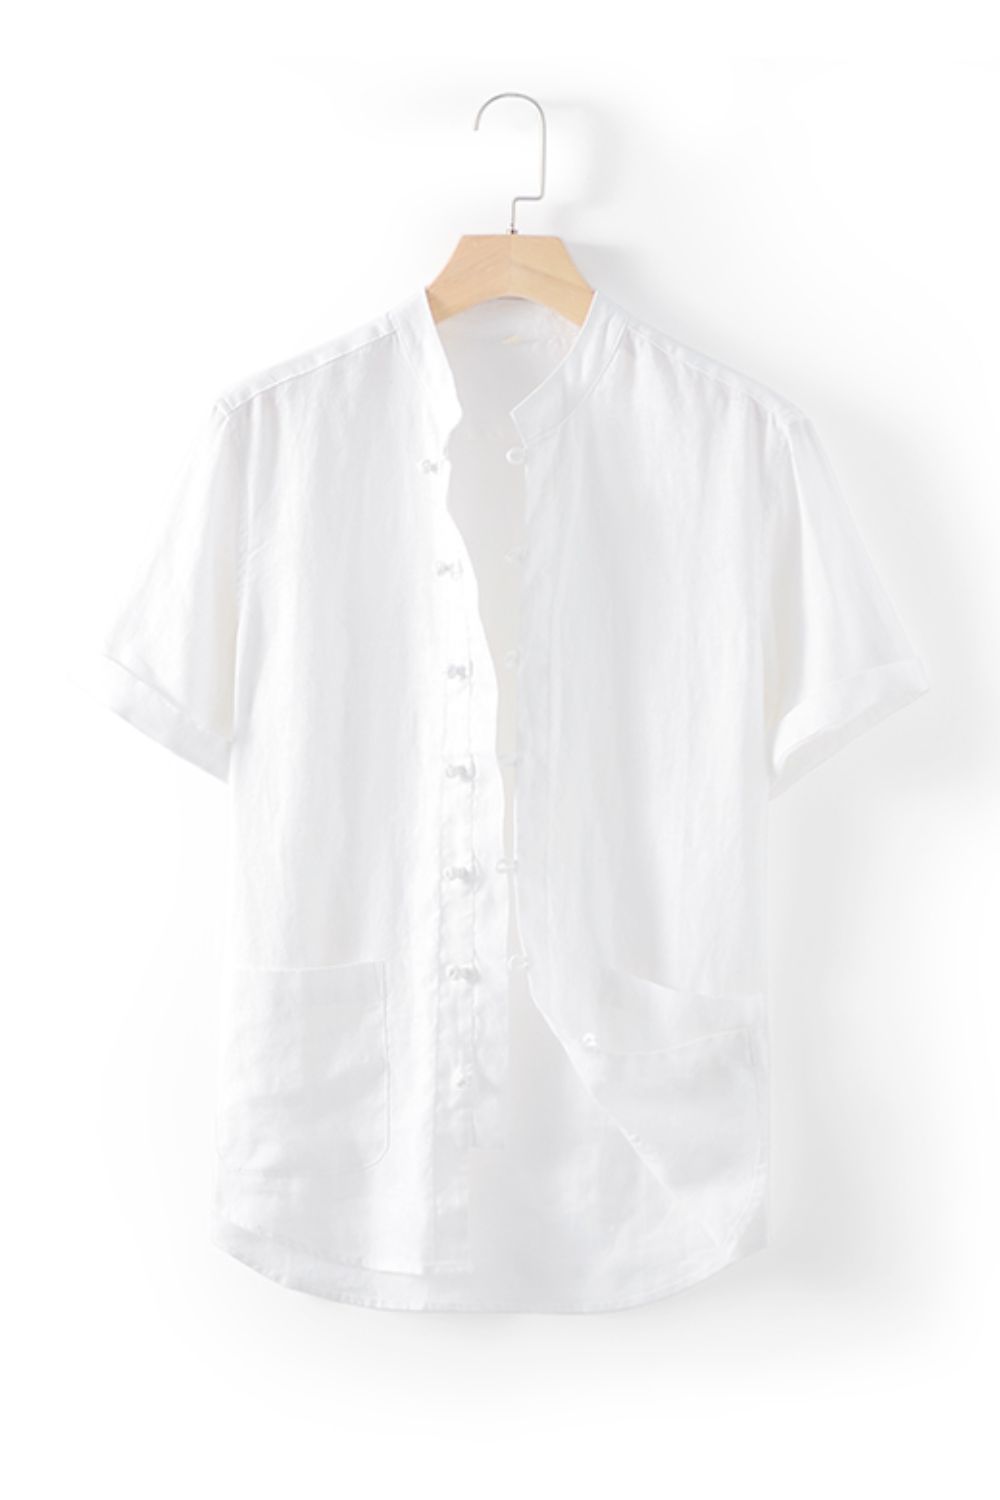 Buttoned Round Neck Short Sleeve Linen Shirt with Pockets_20